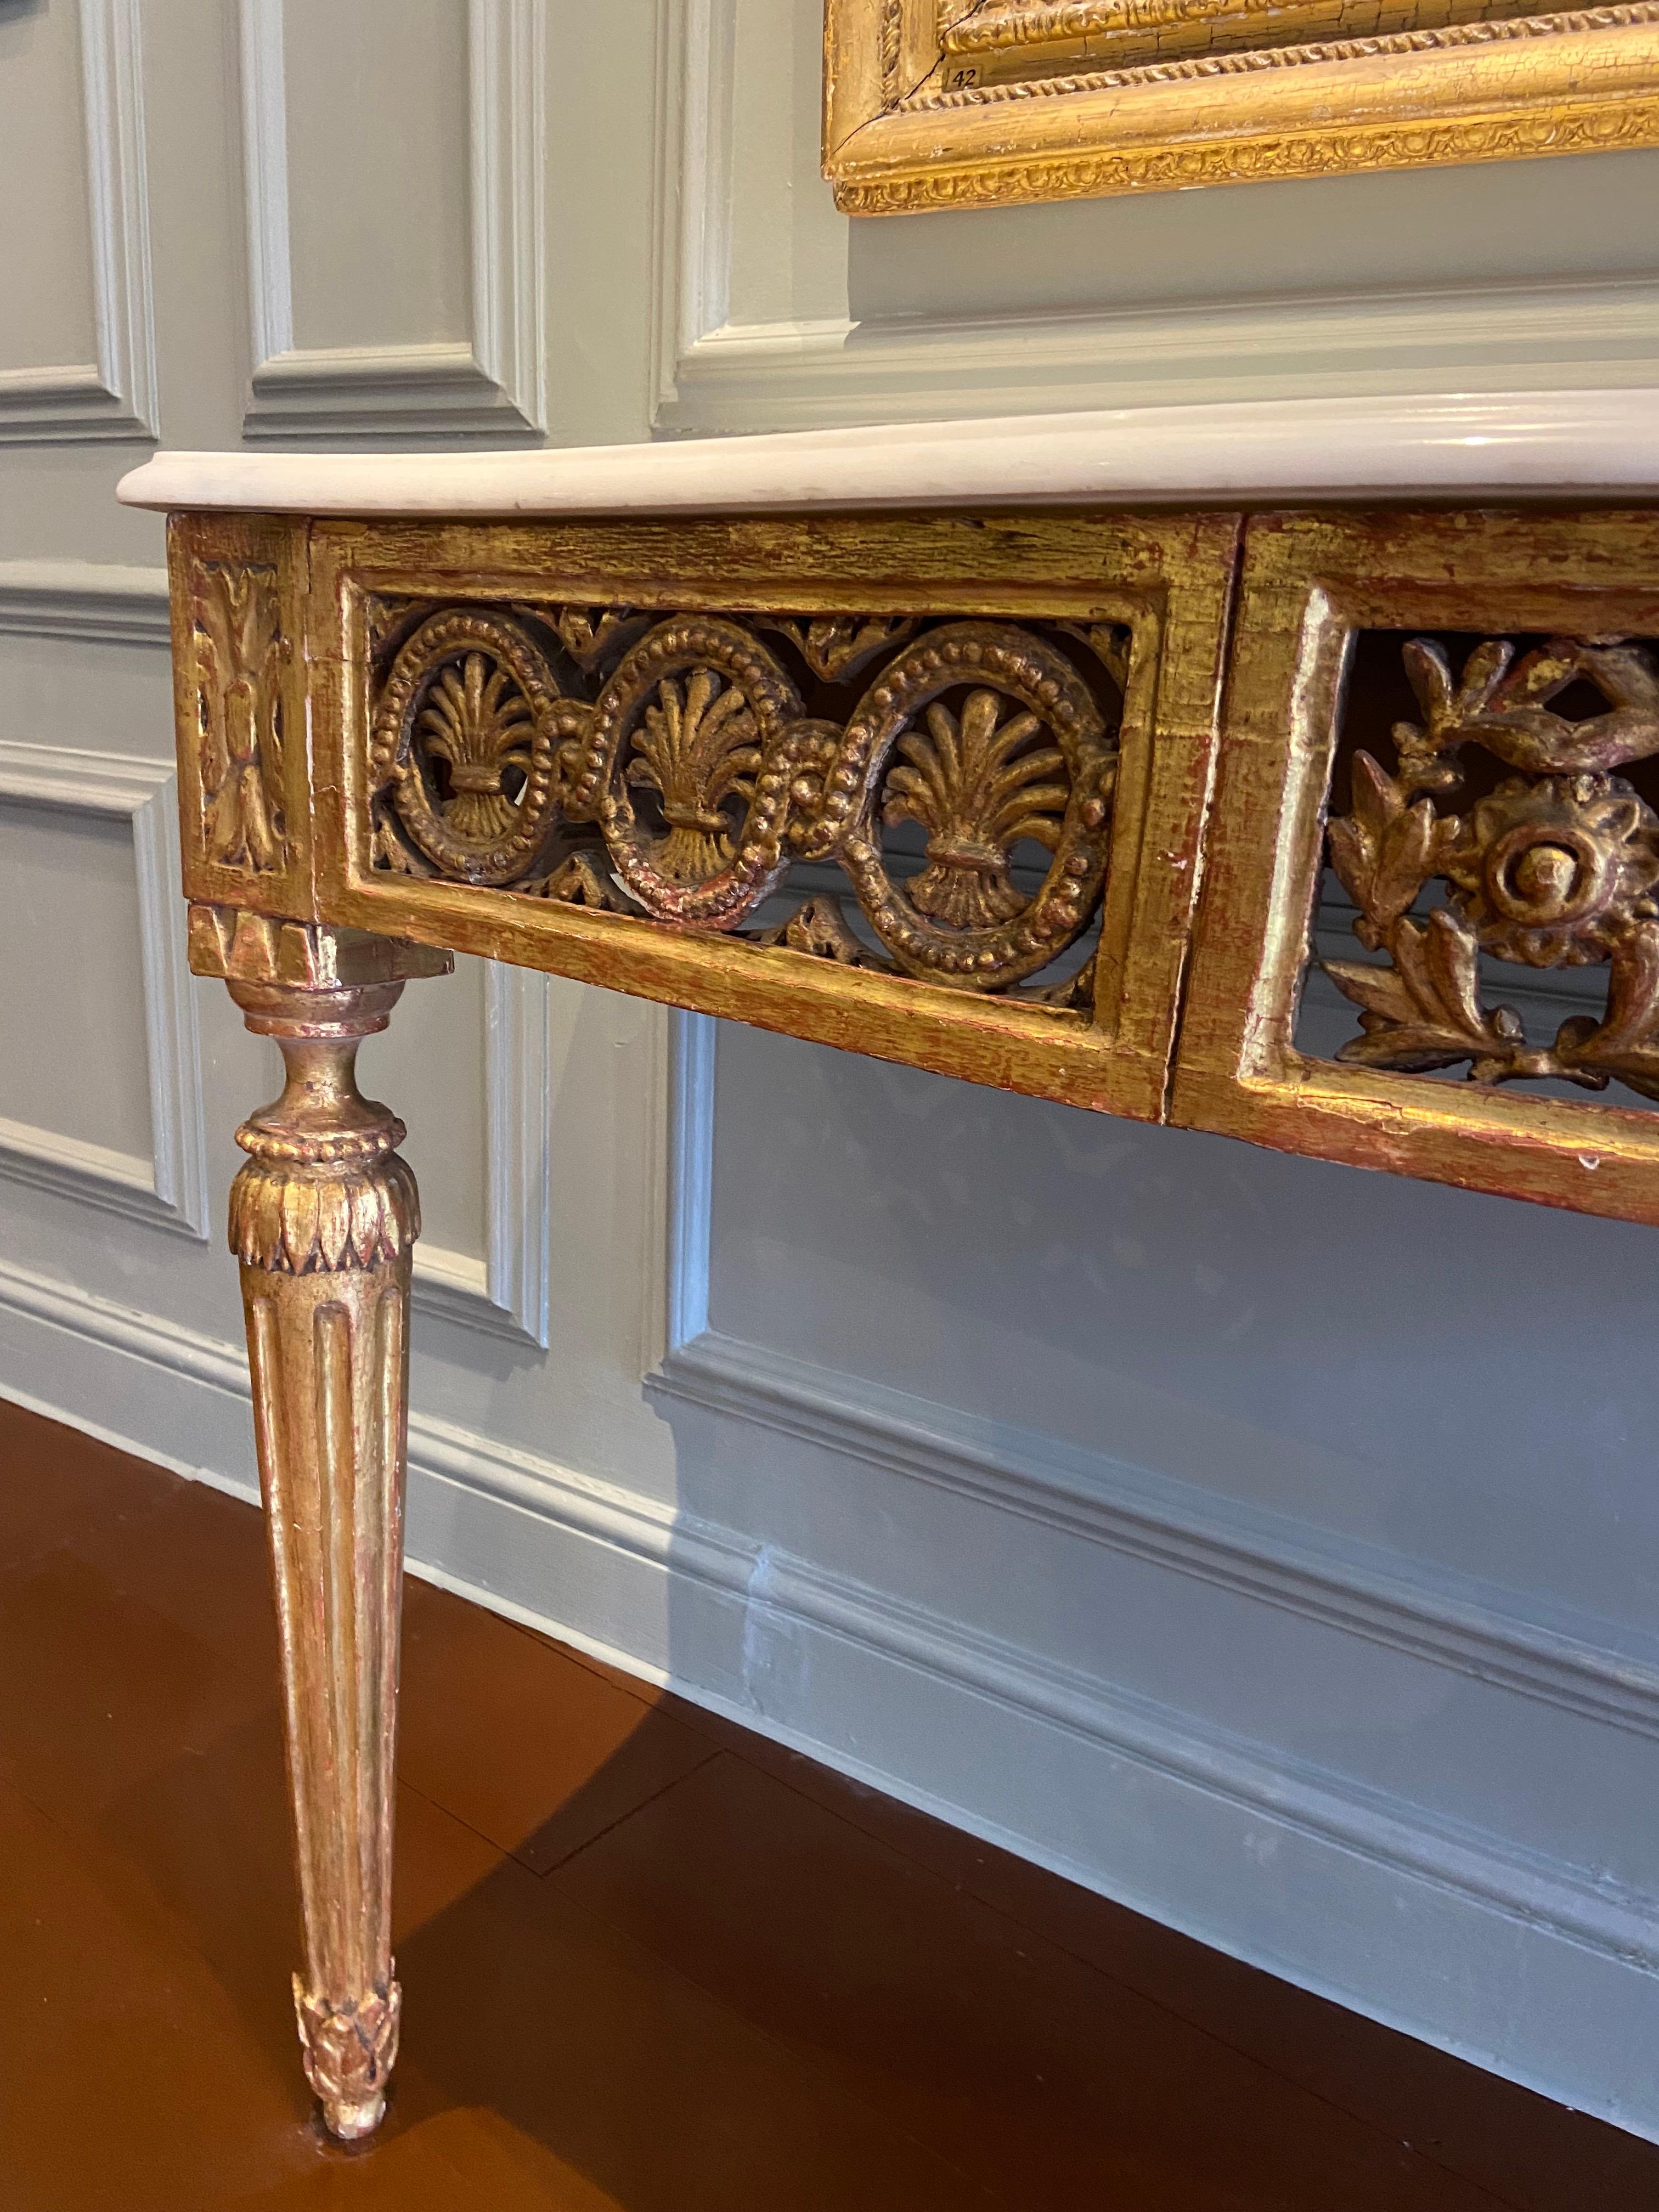 Northern Italian Serpentine Carved Gilt-Wood Console Table 'Late 18th Century' For Sale 5